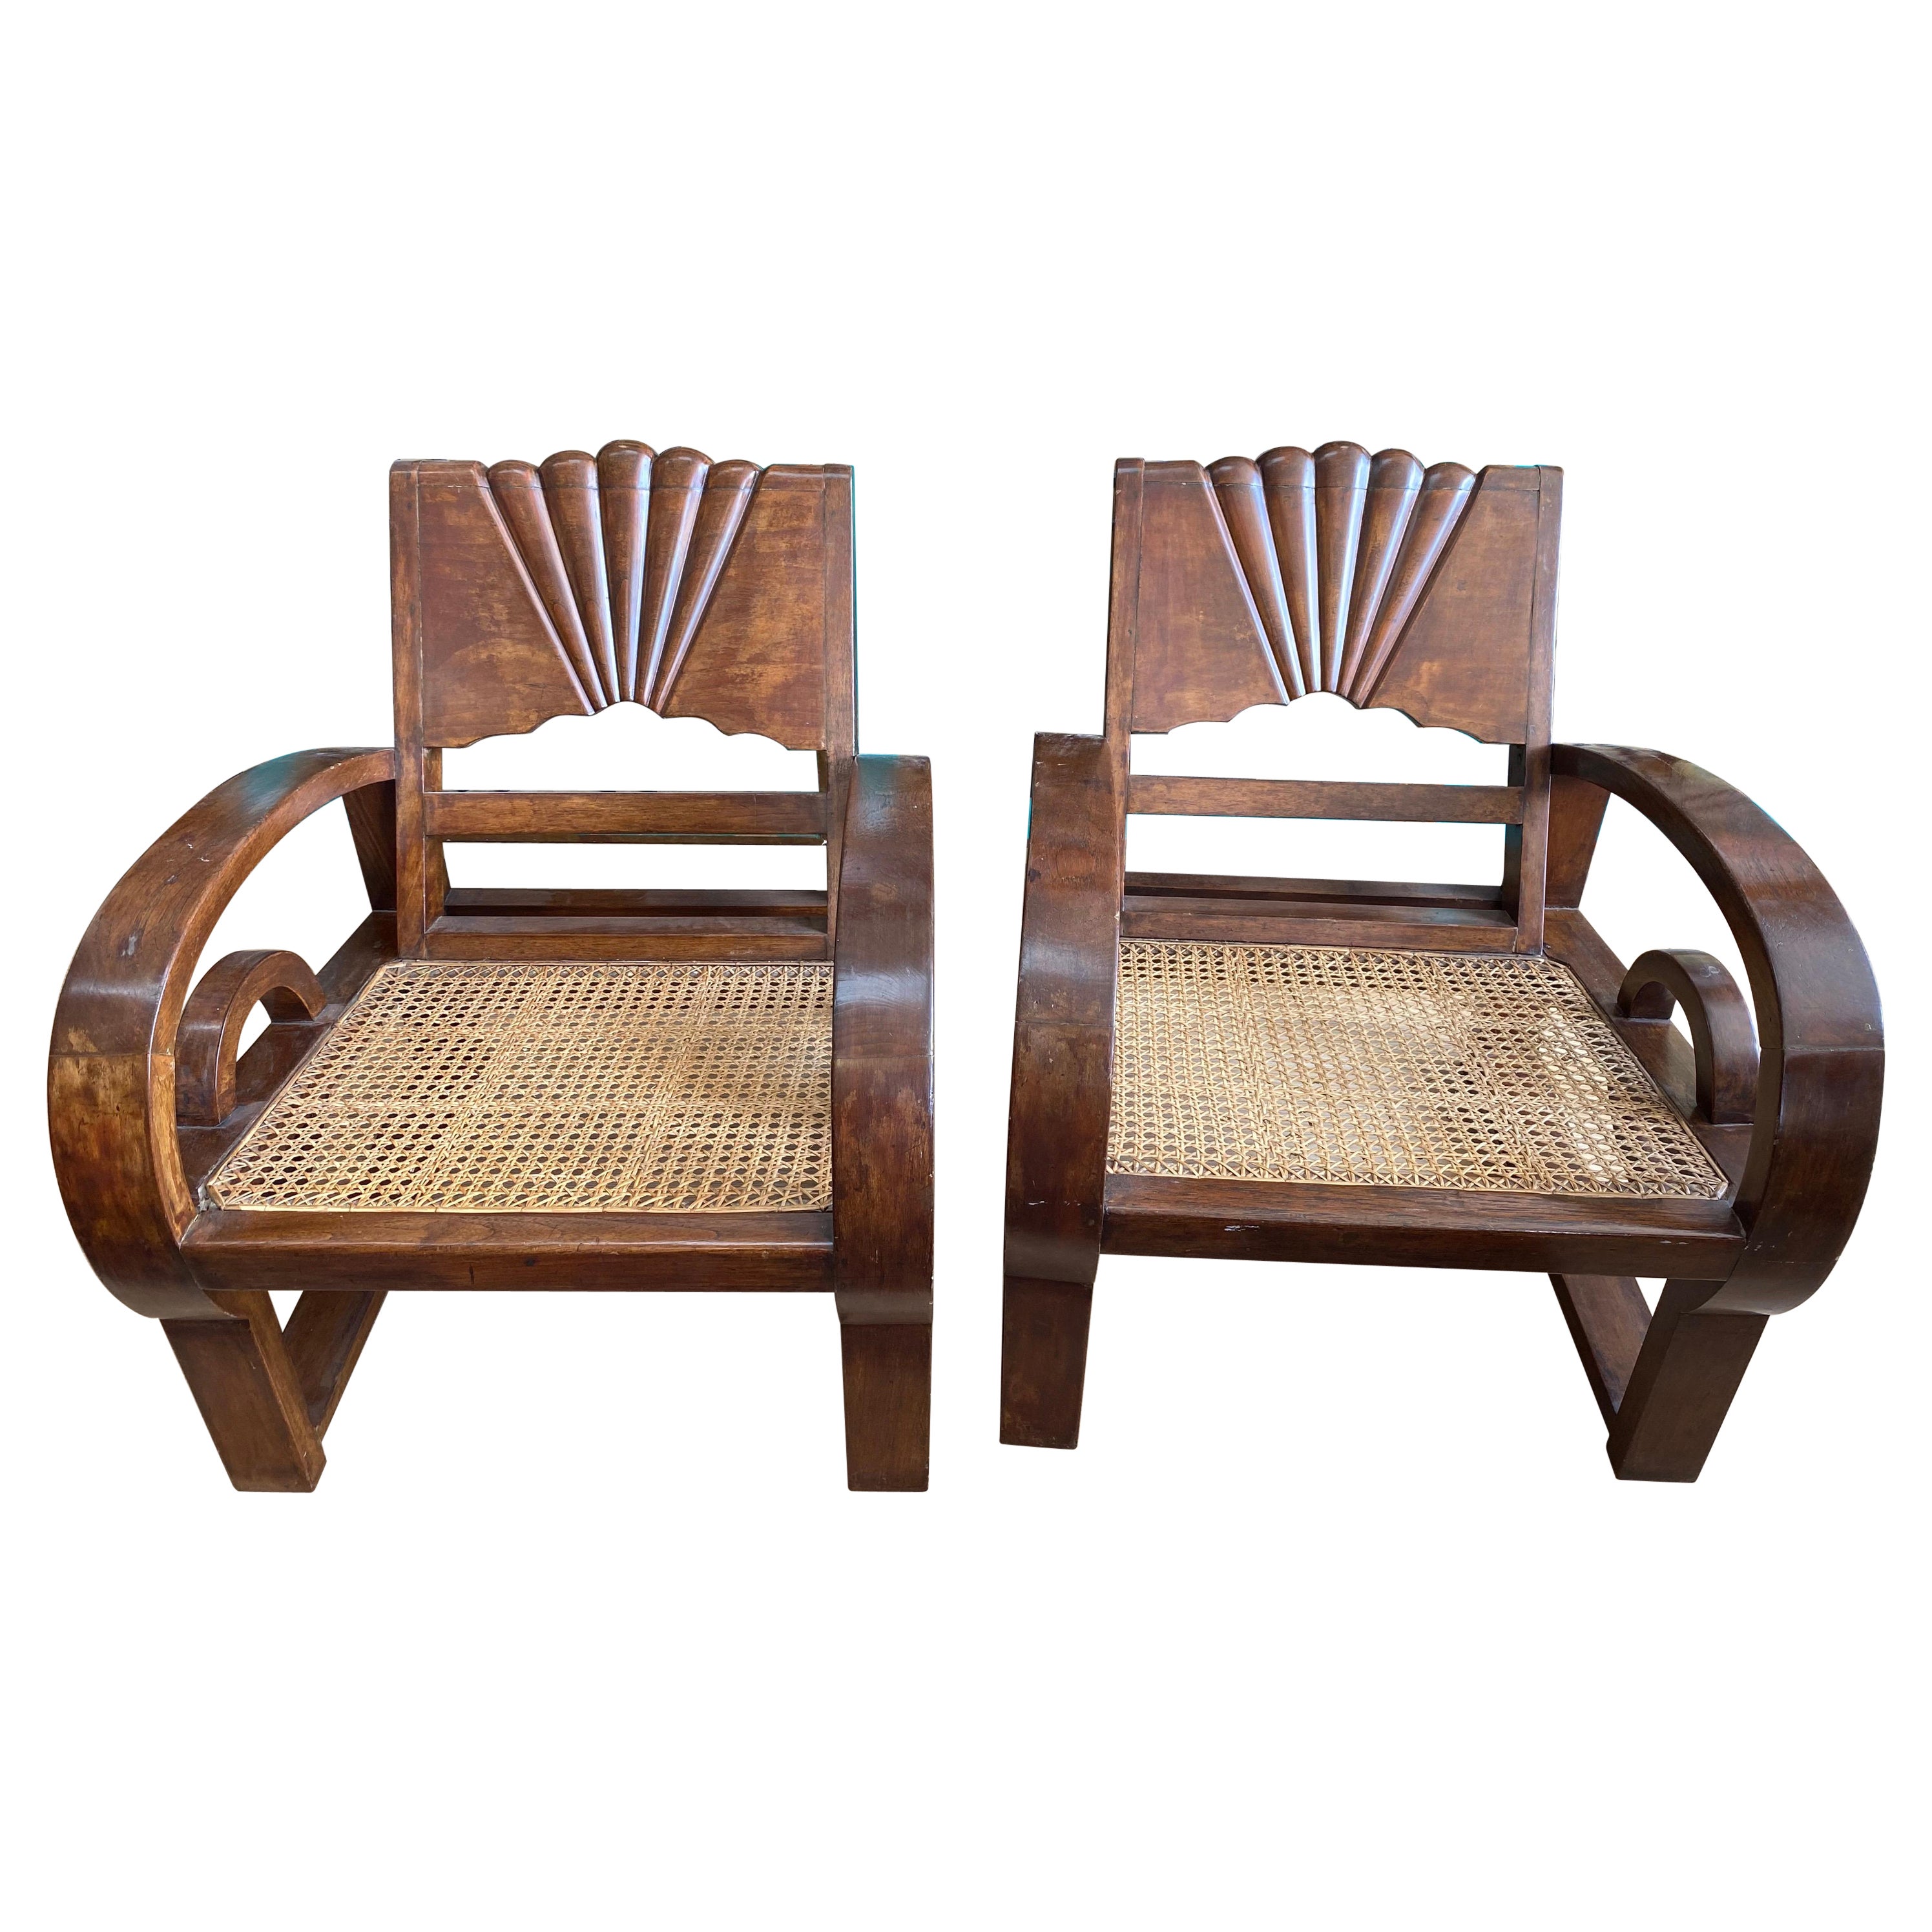 Pair of Madura Indonesian Teak Side Chairs with Rattan Seats